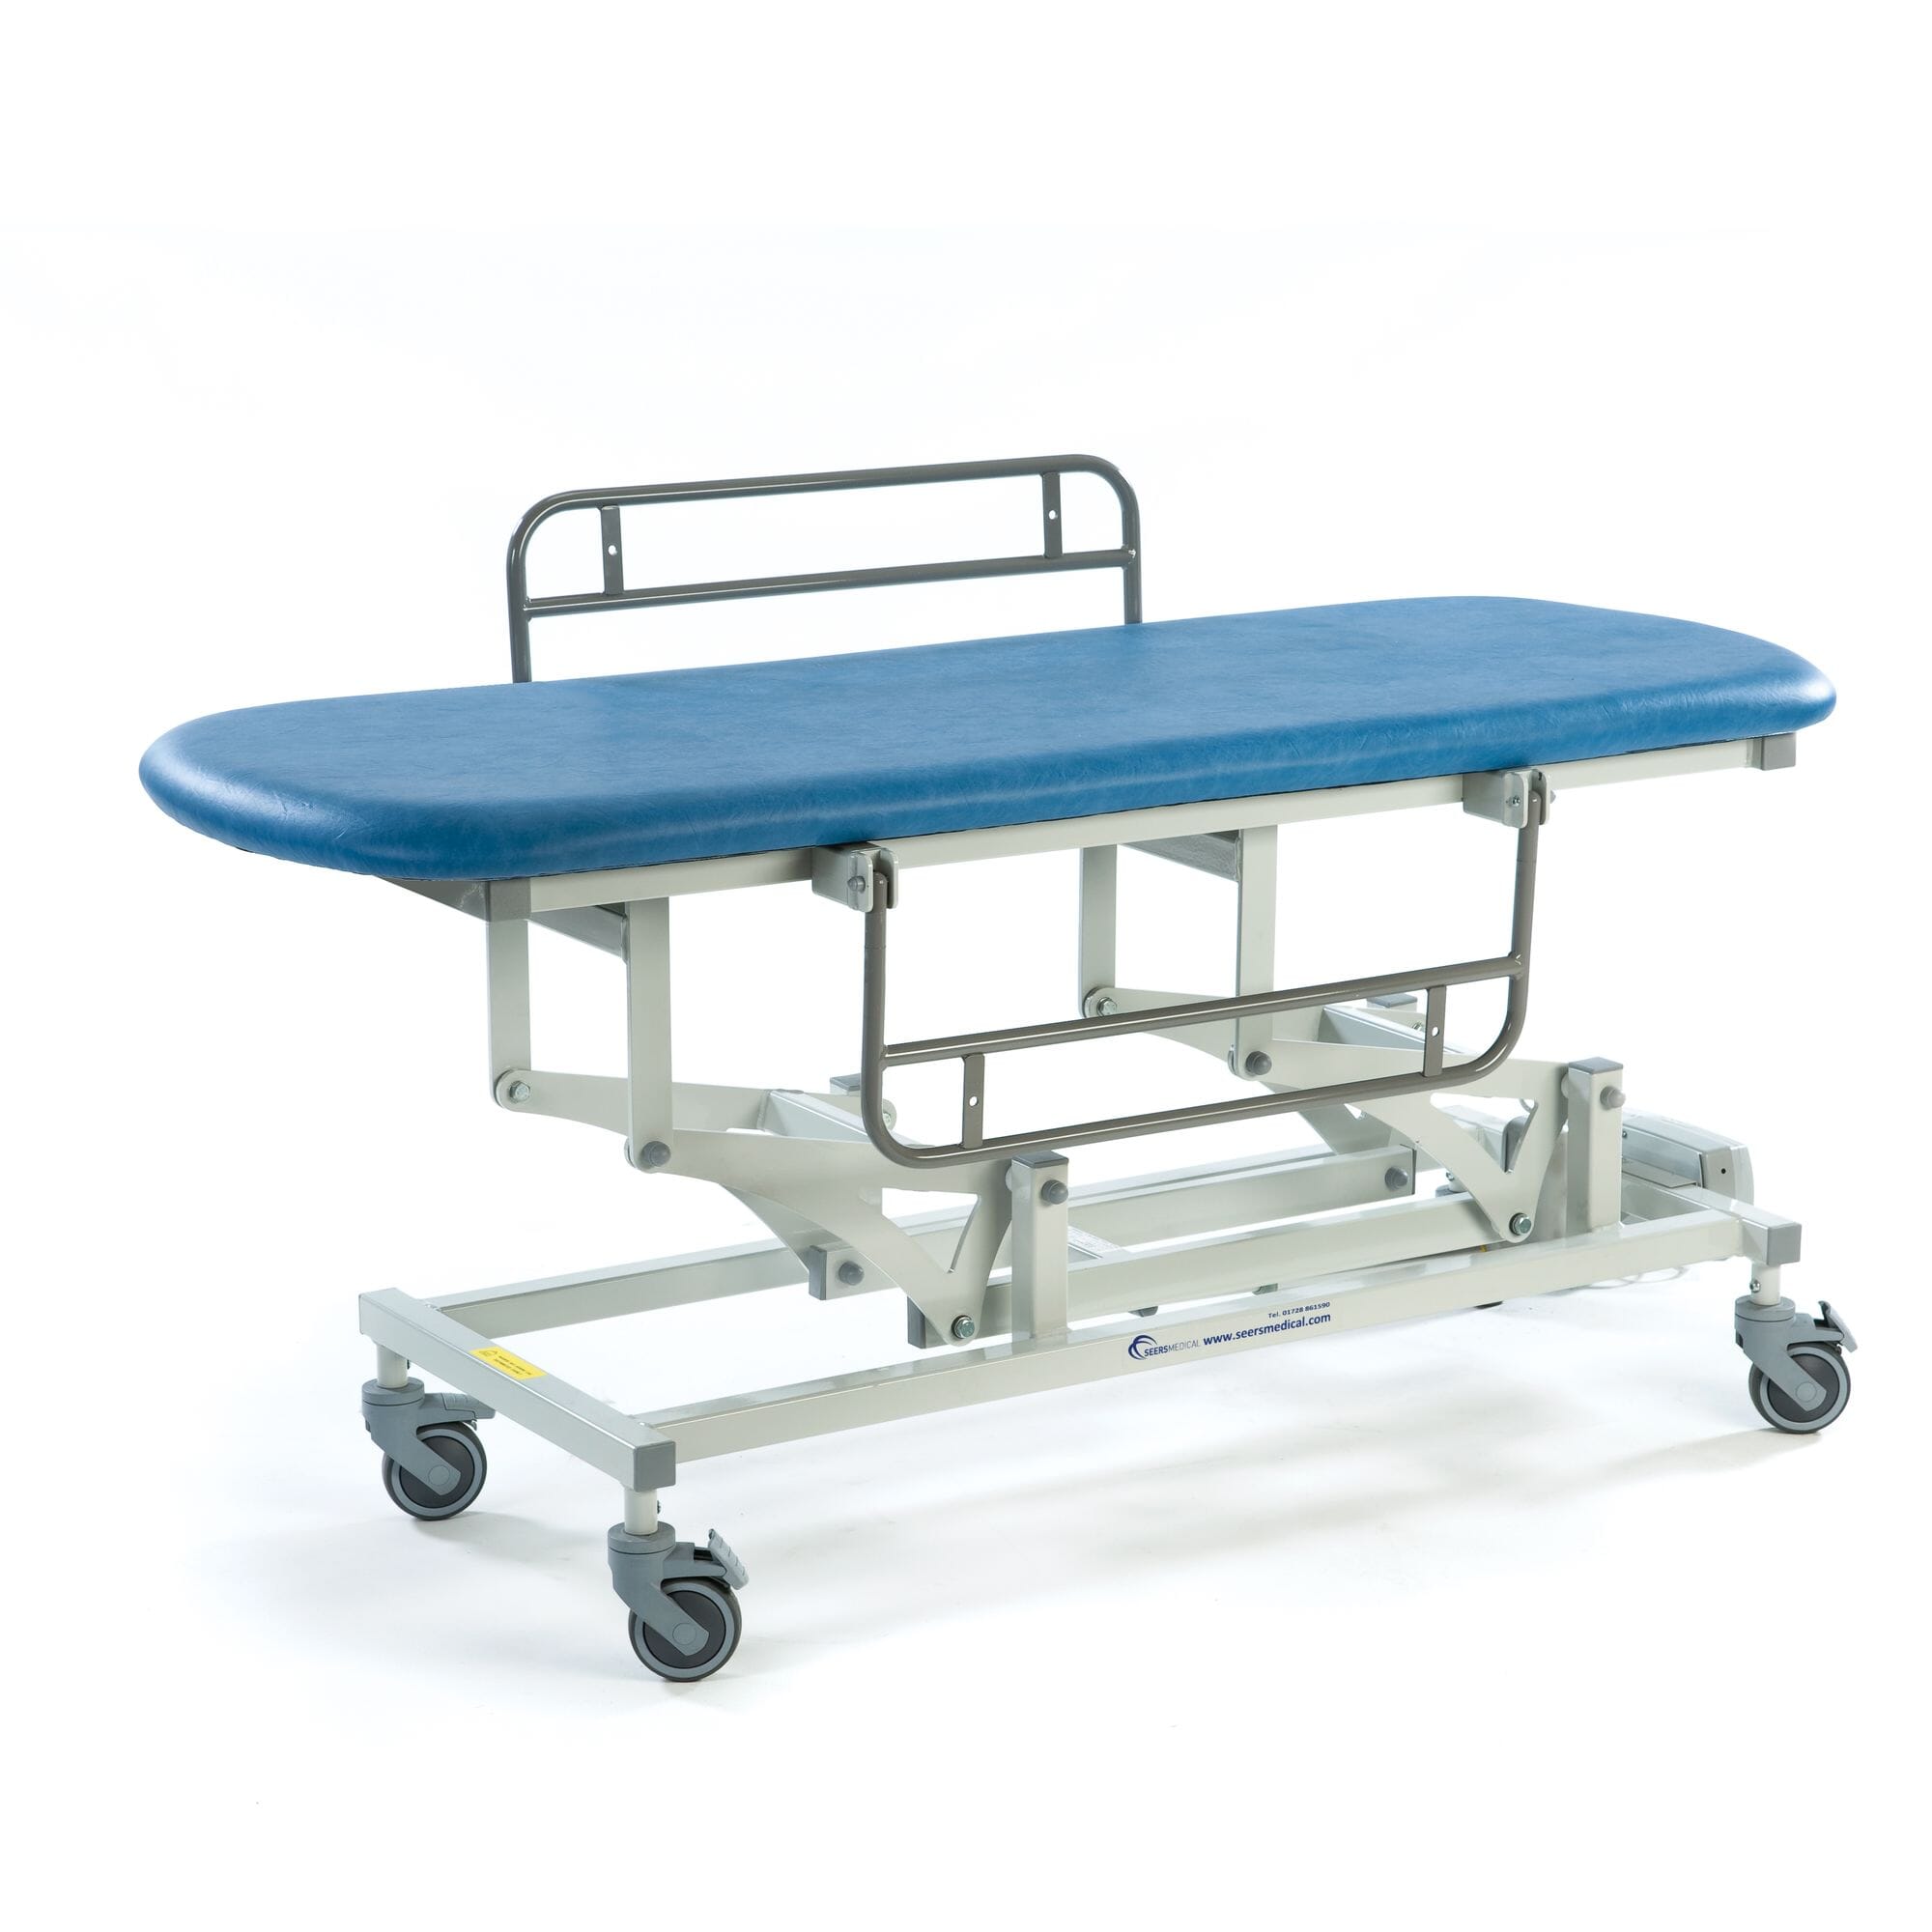 View Electric Sterling Changing Table Sky Blue 1520mm information